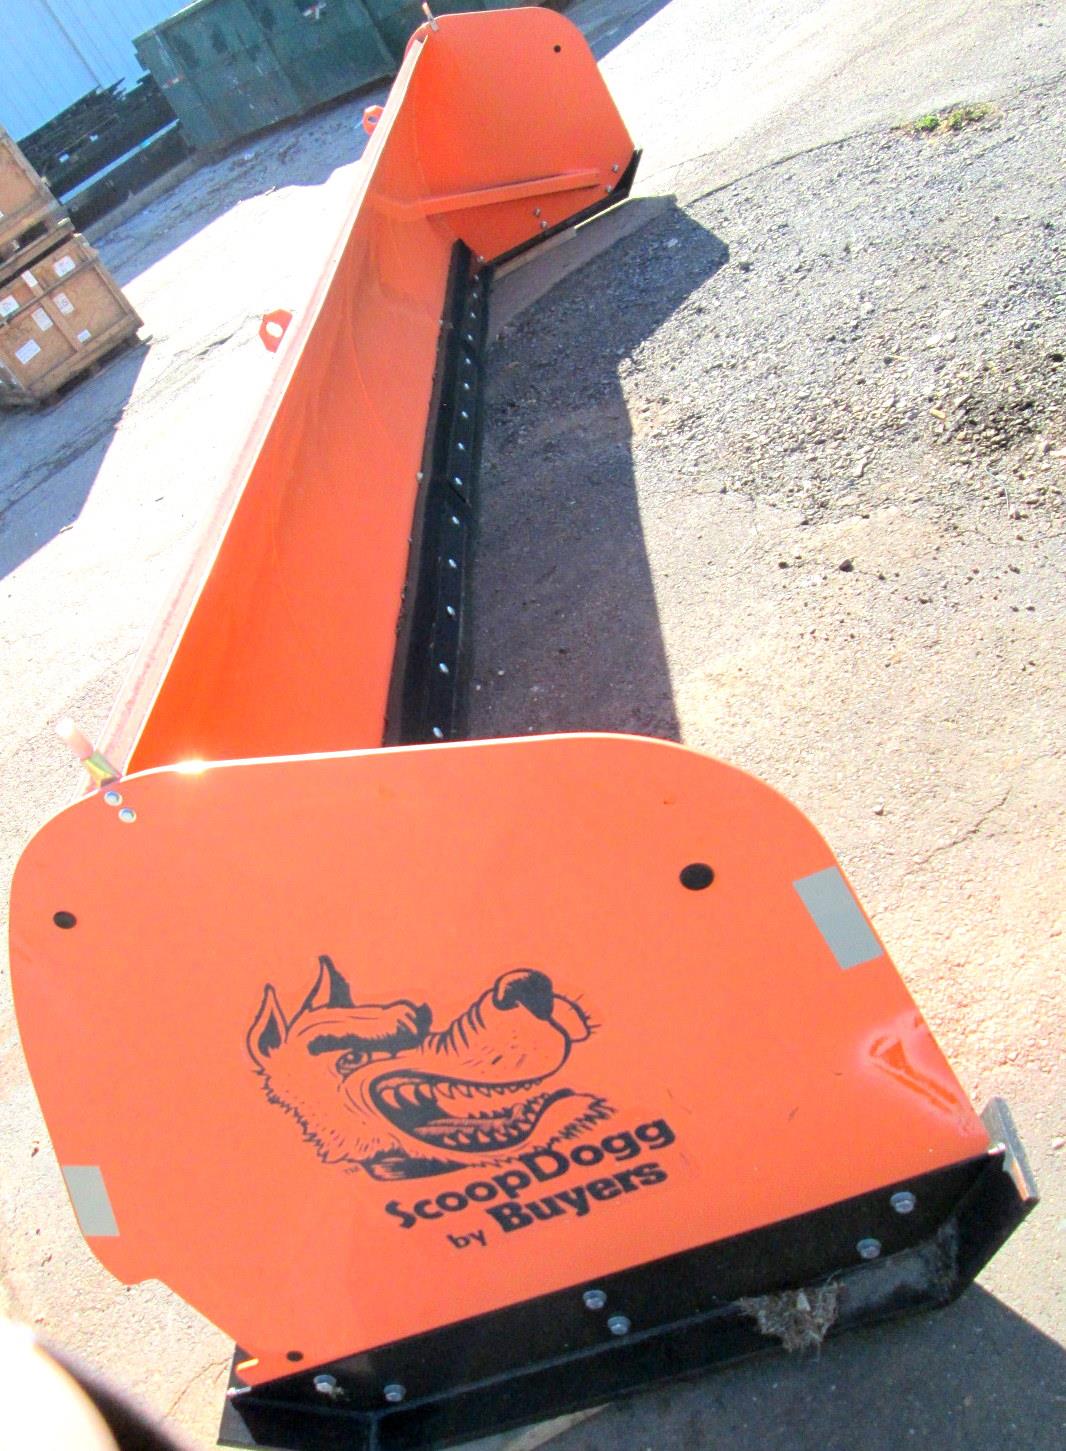 SNOW-051 | SNOW-051  Buyers Scoop Dogg Front Loader 20 Foot Pusher Box Blade Meyer Snow Plow (13).JPG